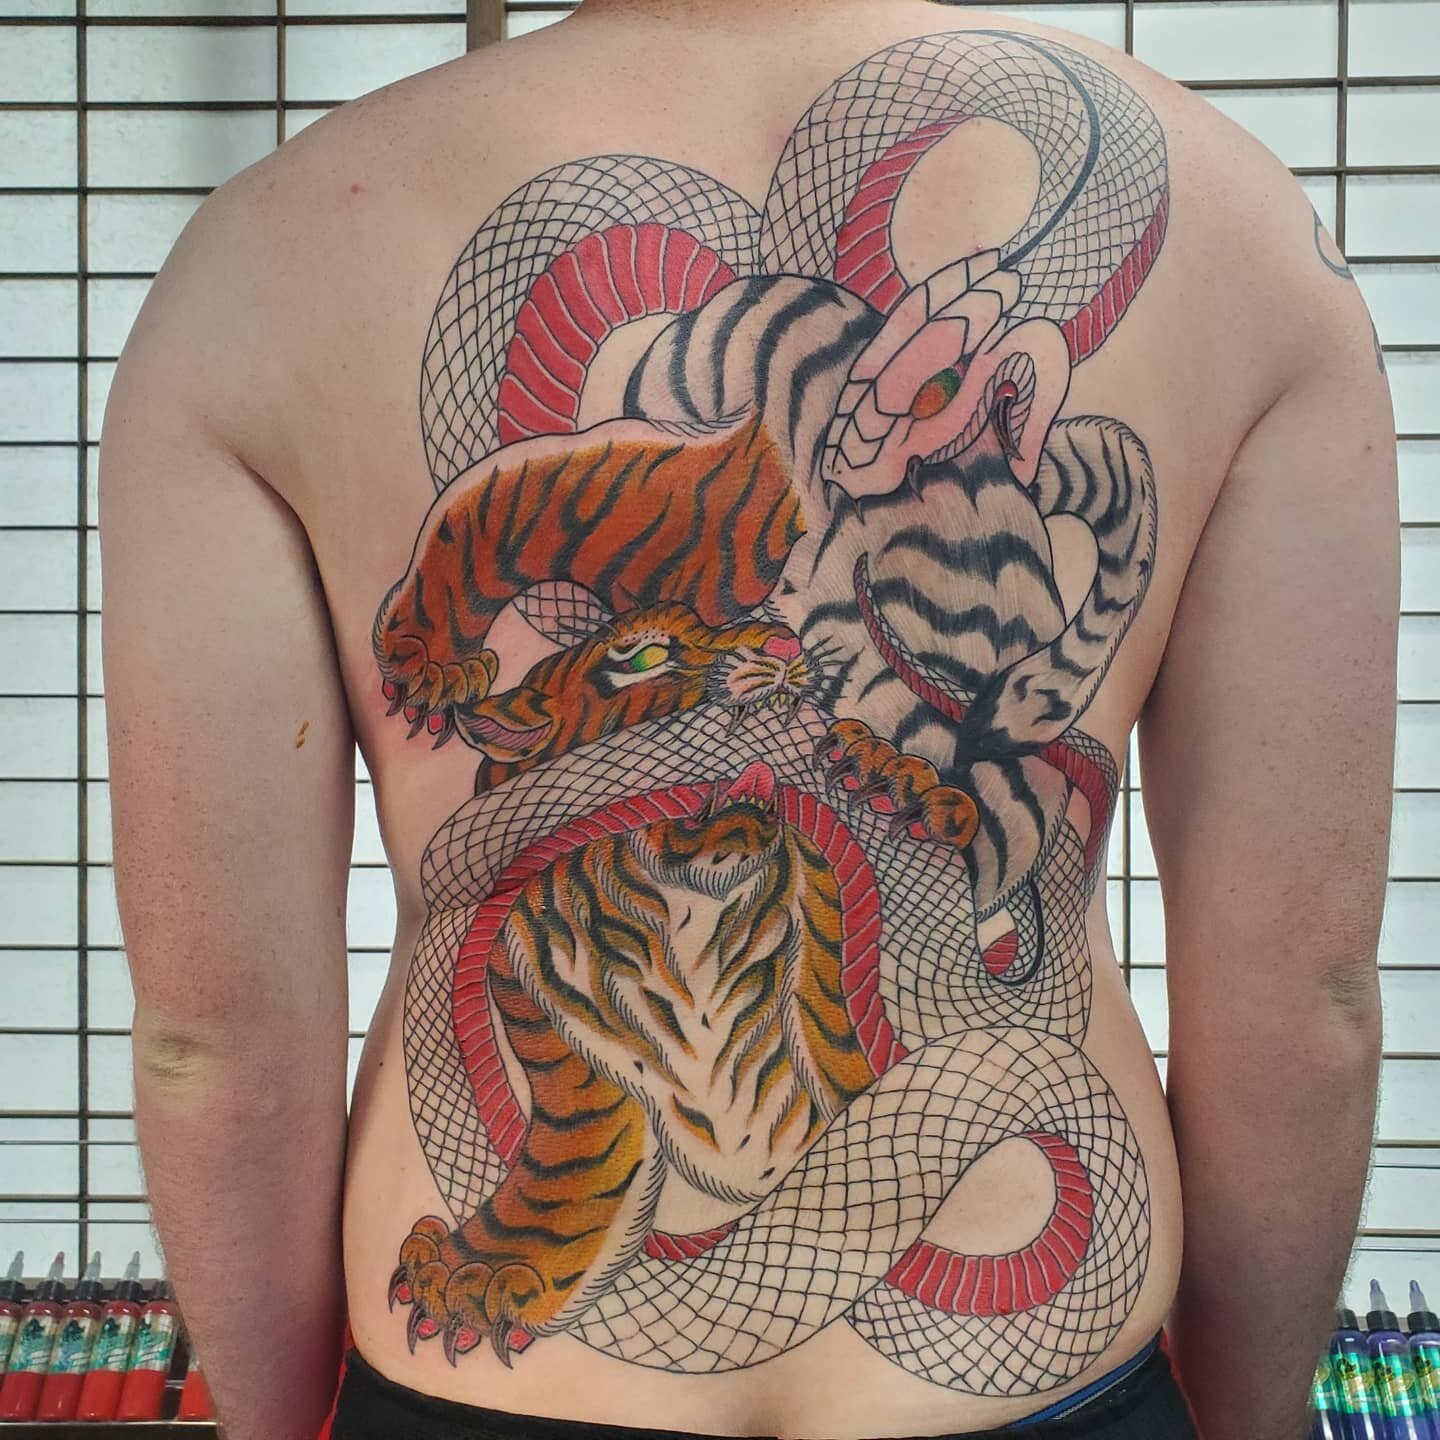 Large snake and sword tattoo done on the back.